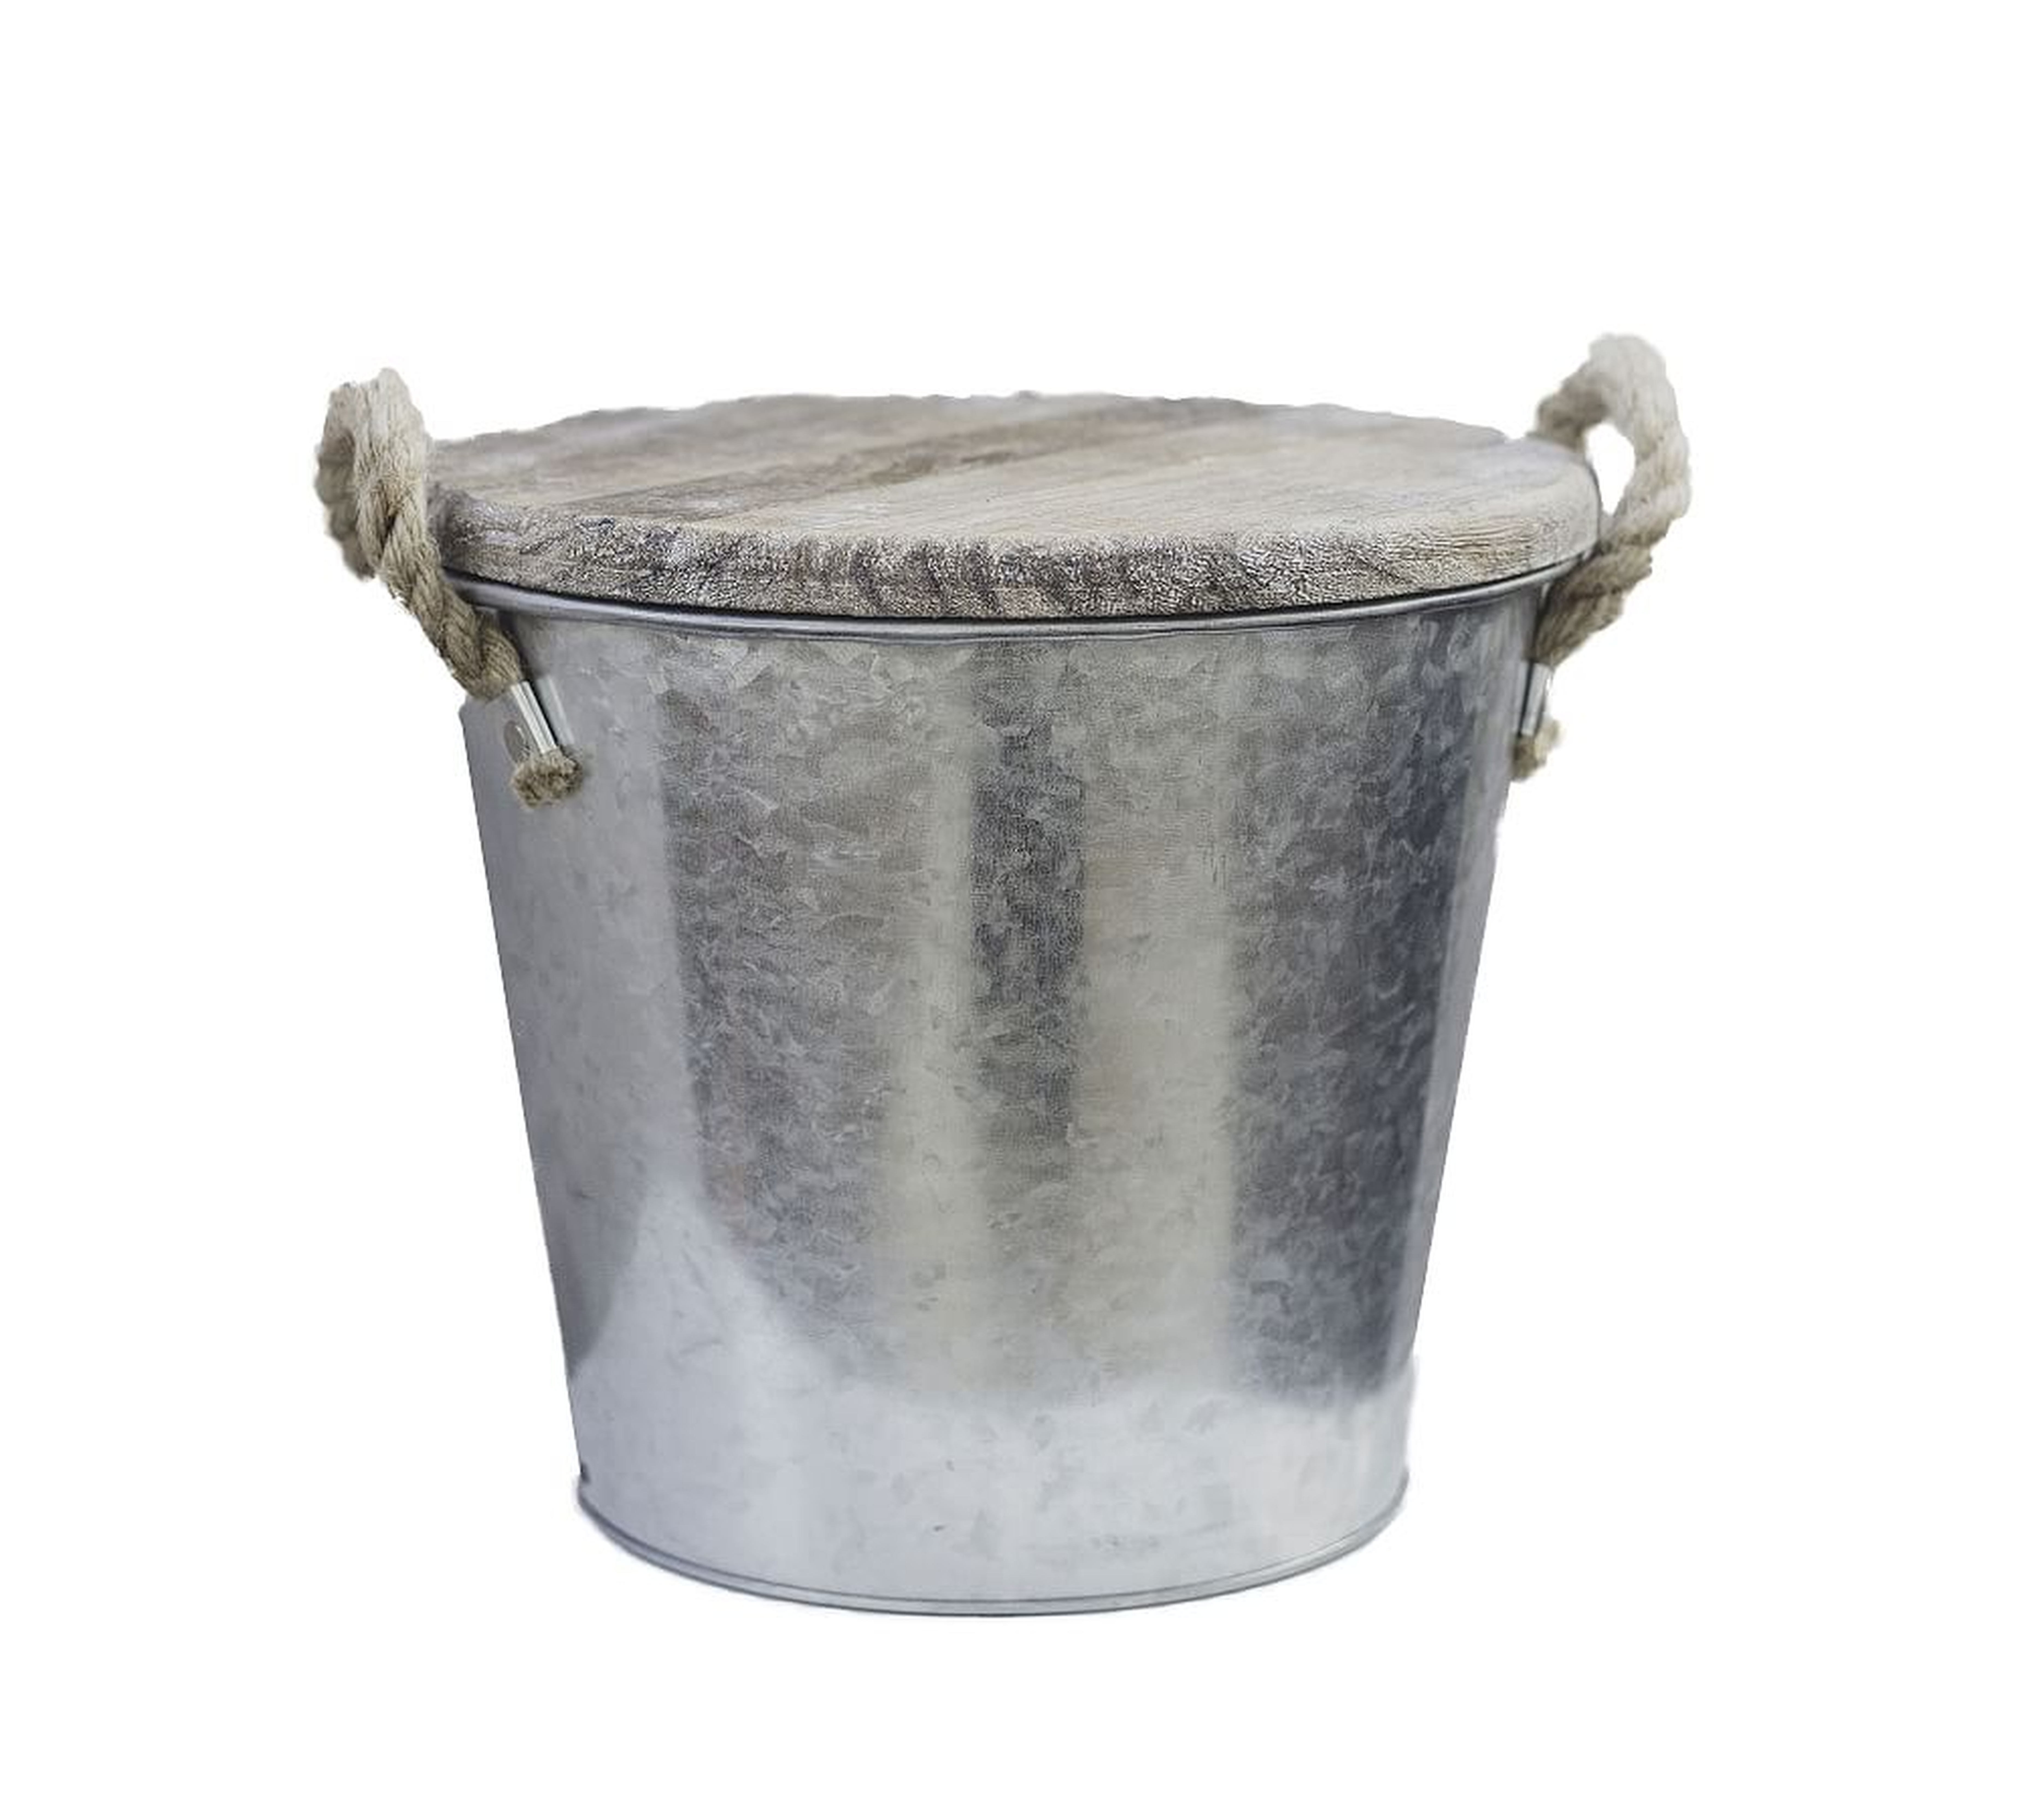 Galvanized Citronella Candle Bucket with Wood Lid, 9.25"H, Single - Pottery Barn